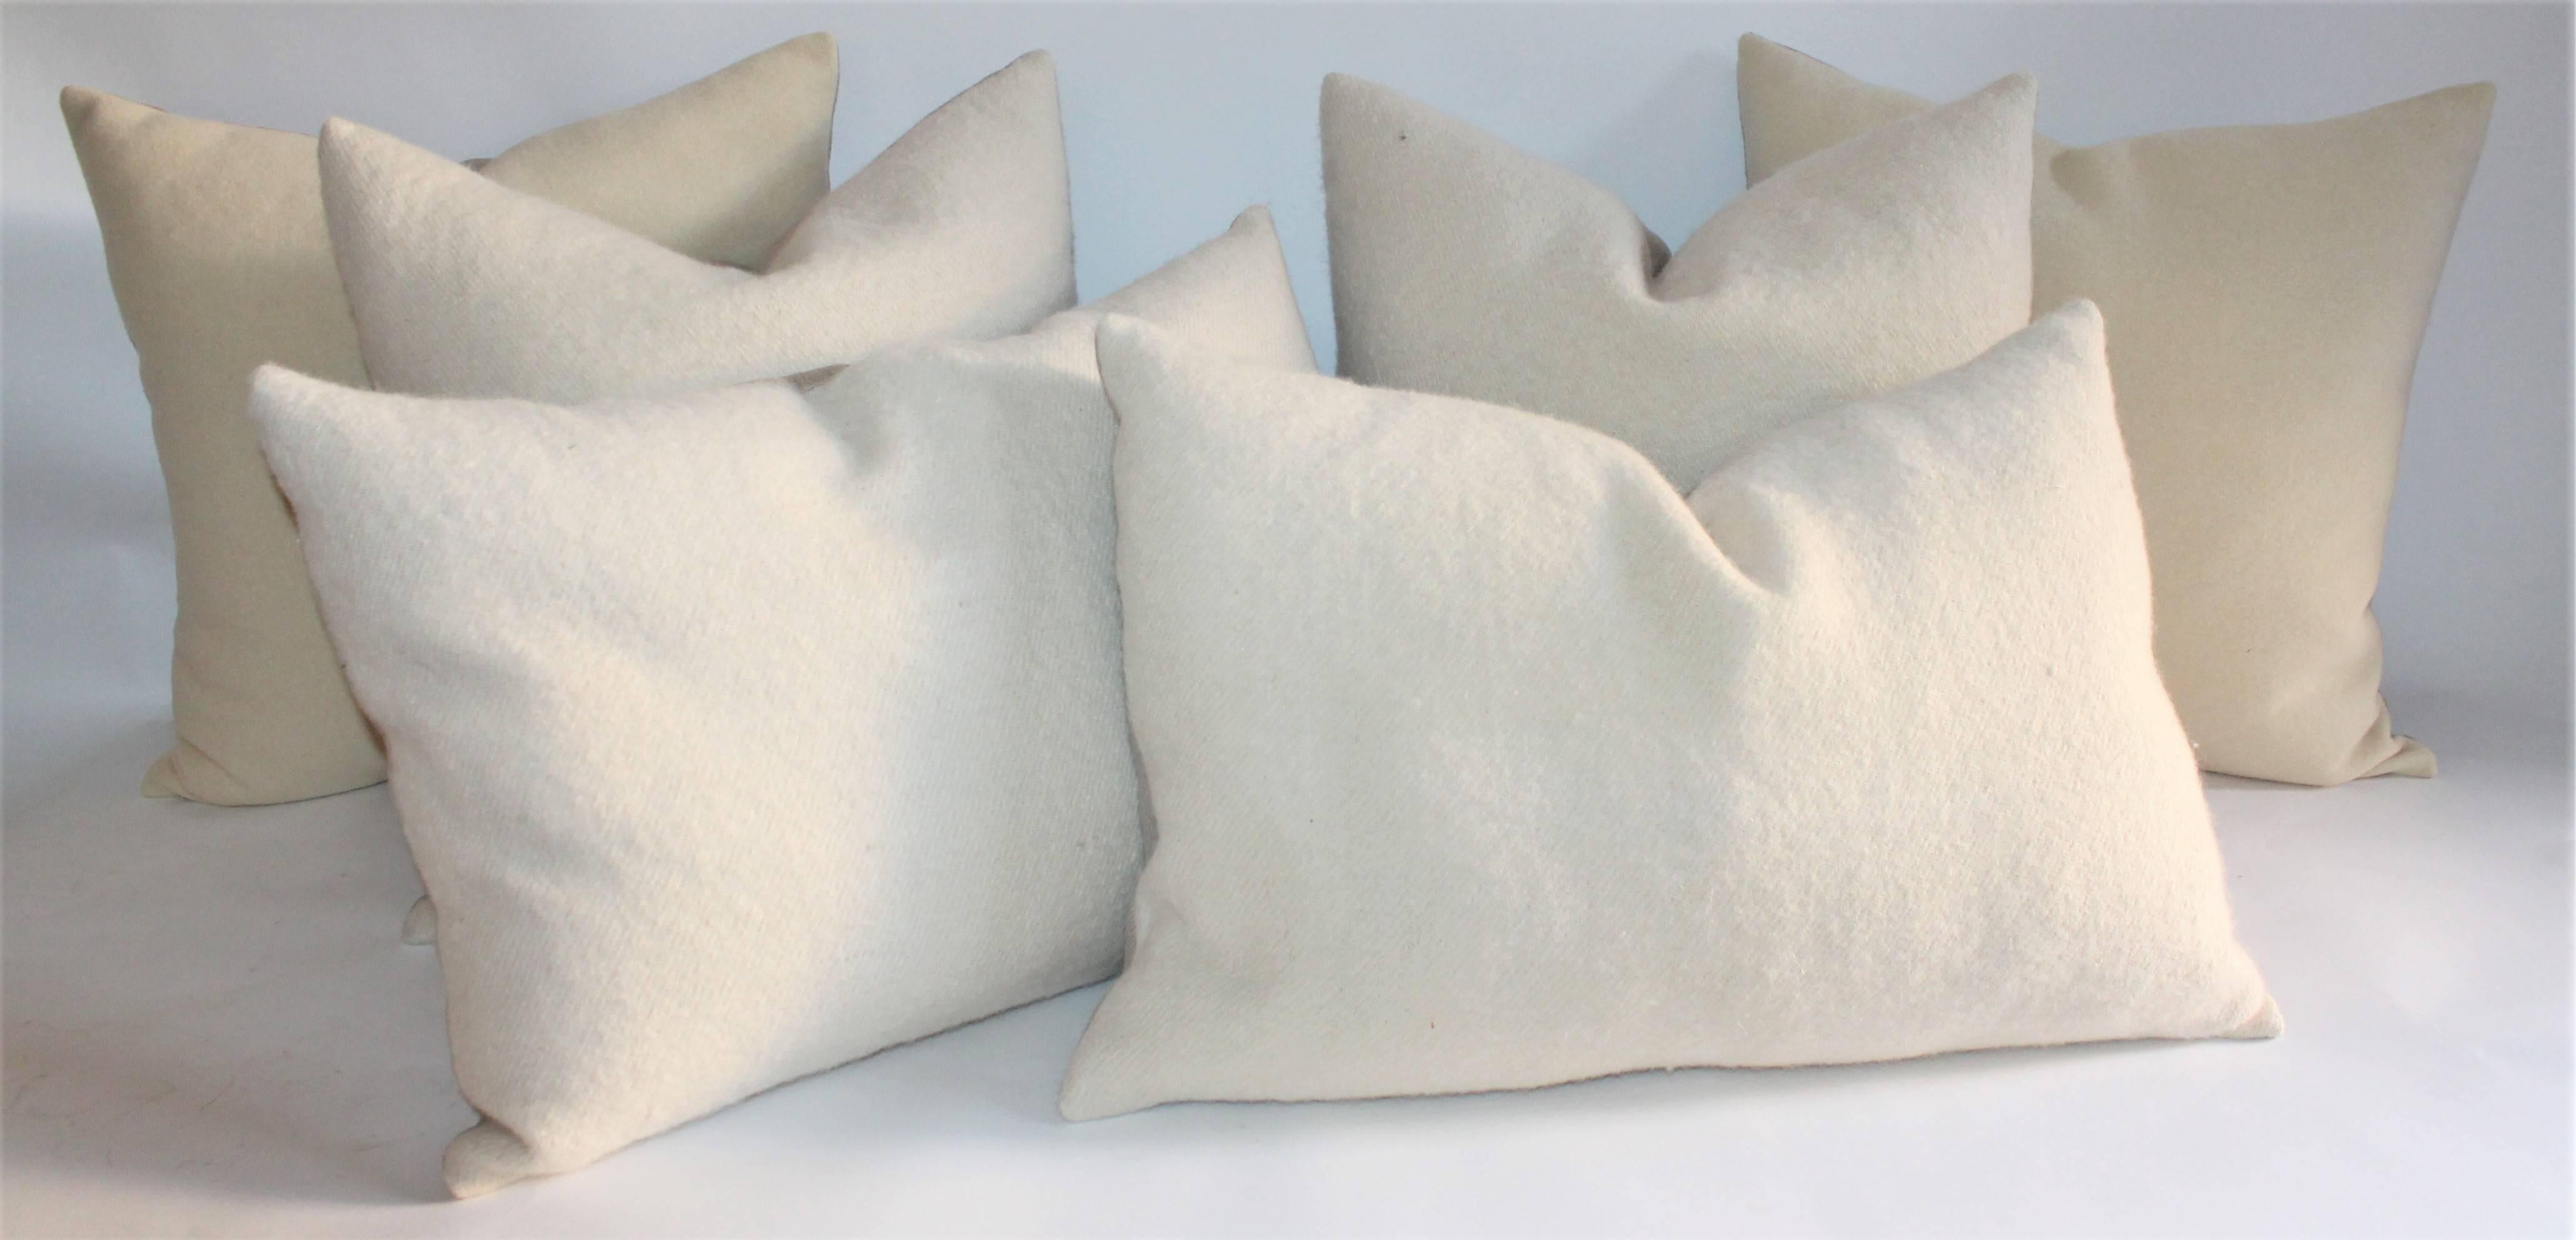 These fine alpaca / lambs wool pillows are in fine condition and sold in pairs.
The backings are a fine cream colored cotton linen. Down and feather fill.


Square Alpaca measures 22 inches x 22 inches.



Larger Rectangular Alpaca Bolster